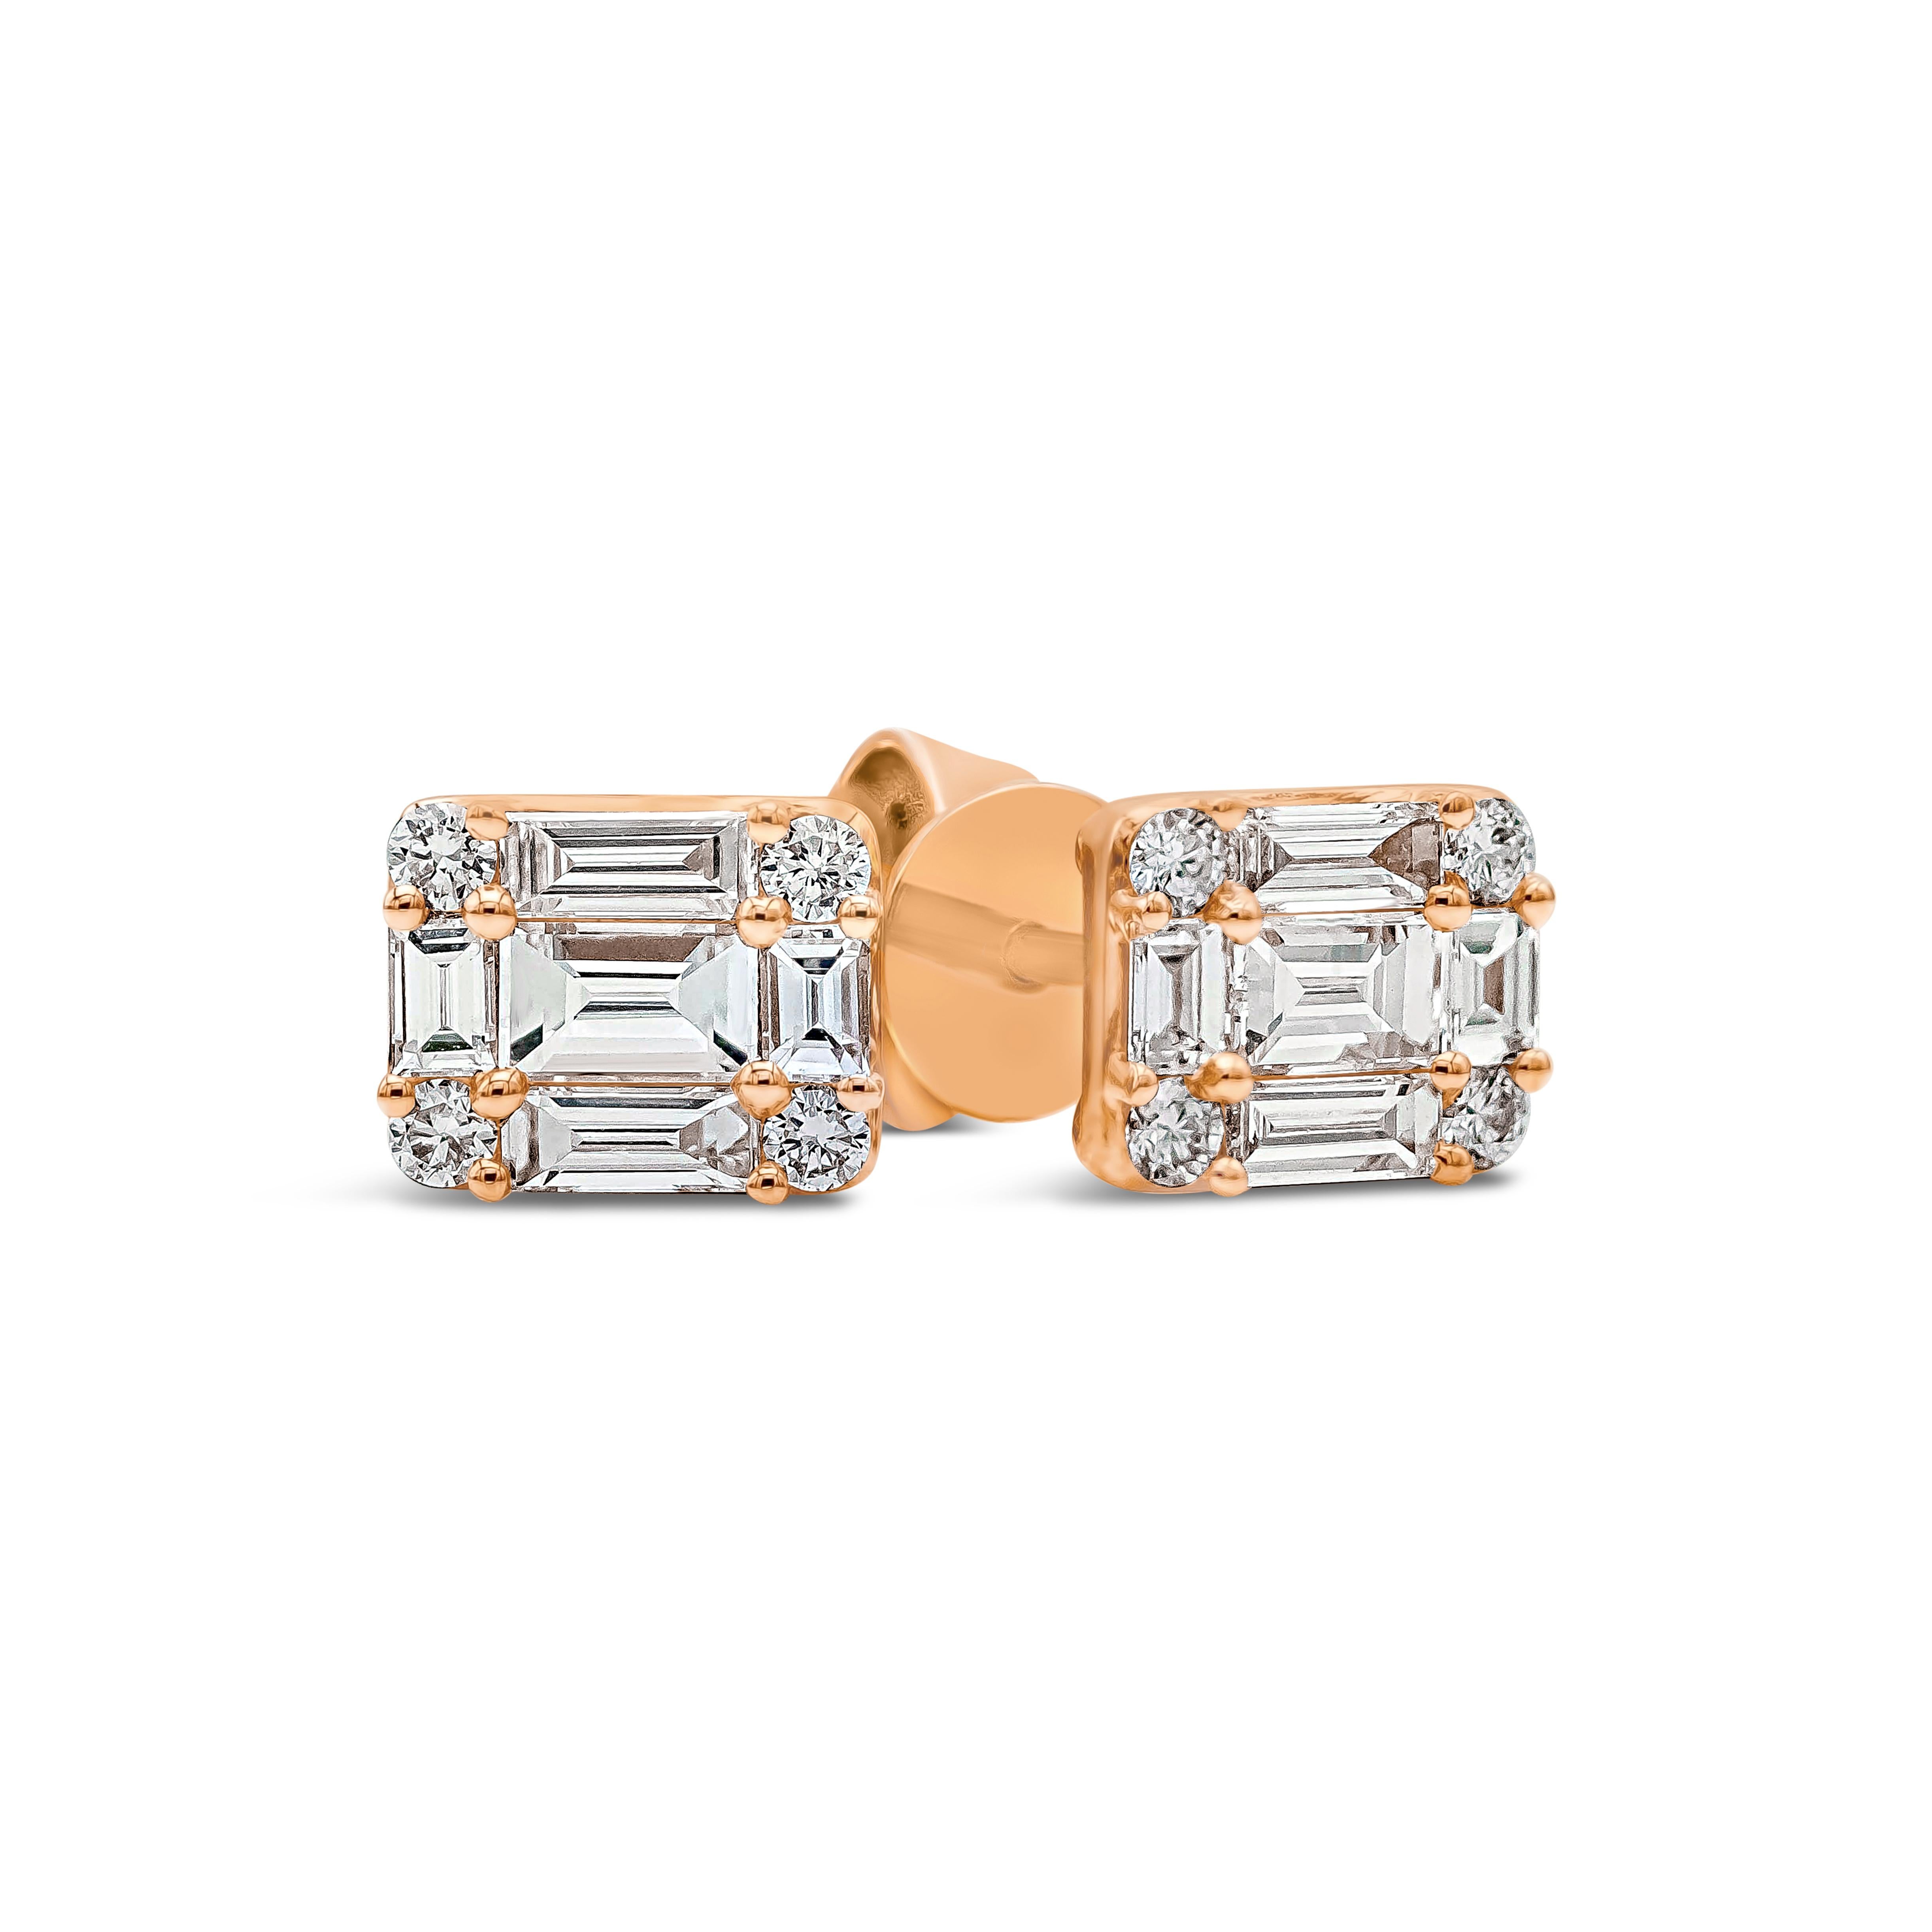 A stylish pair of stud earrings showcasing a cluster of baguette and round diamonds set in an illusion style to make it look like one large diamond. Baguette diamonds weigh 0.70 carats total; round diamonds weigh 0.14 carats total. Made in 18k rose